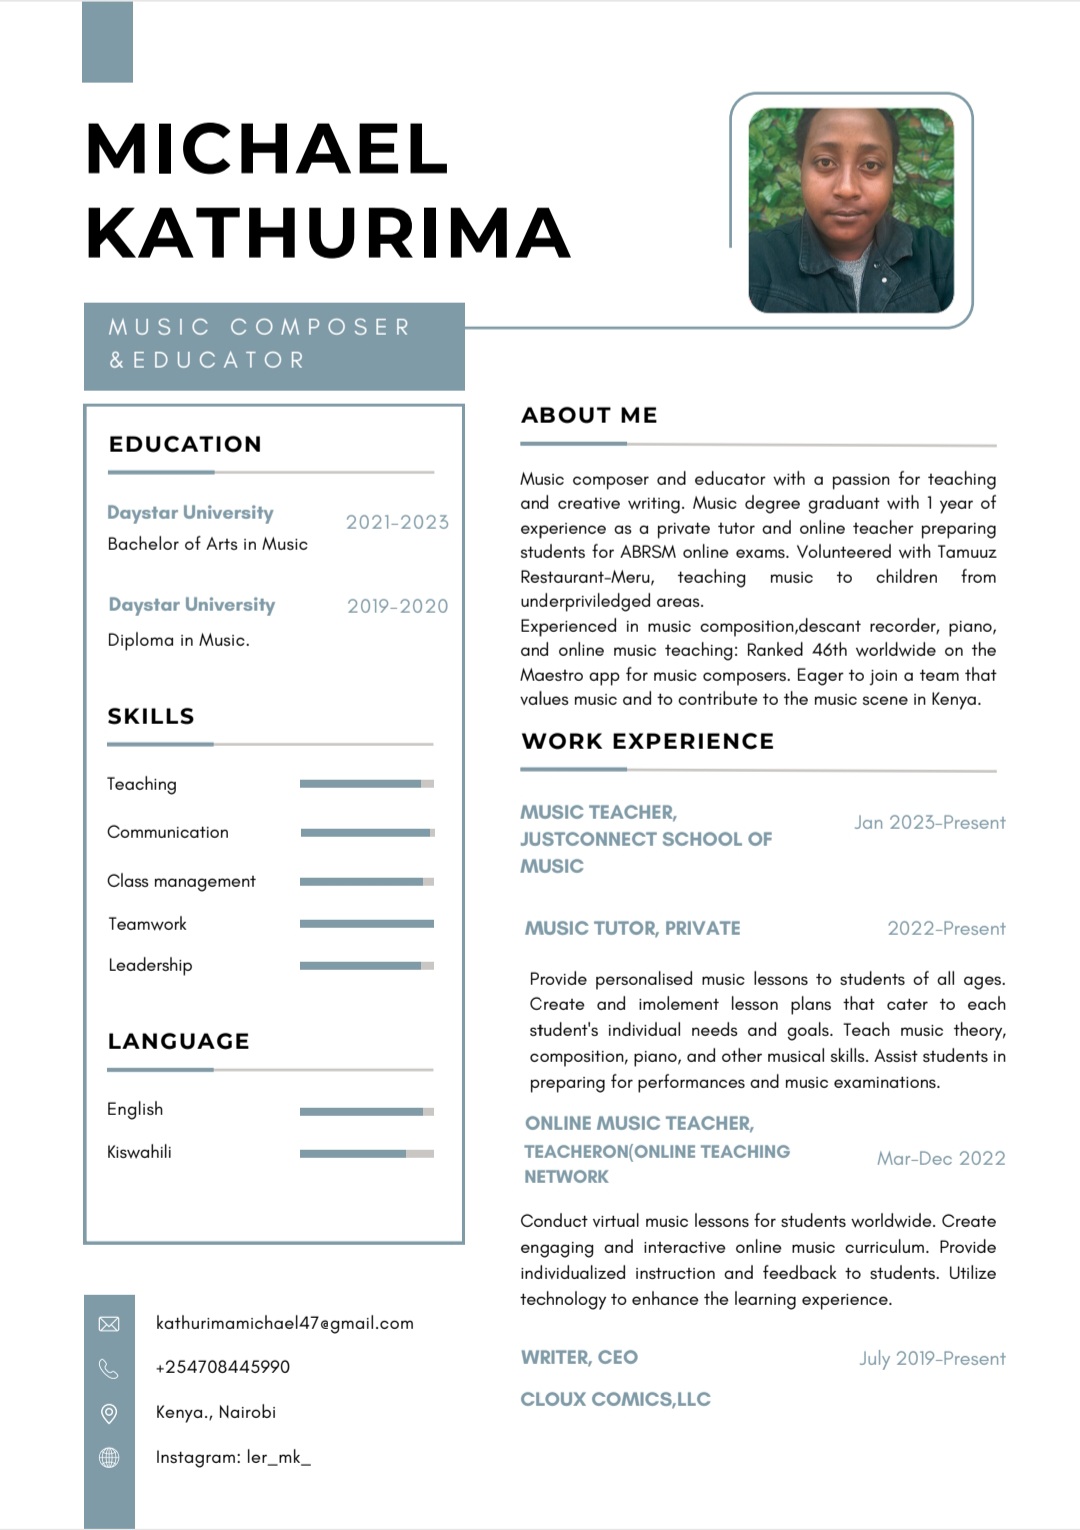 MICHAEL
KATHURIMA

MUSIC COMPOSER
&amp;EDUCATOR

ABOUT ME
EDUCATION

 

Music composer and educator with a passion for teaching
Daystar University ond creative writing. Music degree greduont with | yeor of
experience as a private tutor and online teacher preparing
students for ABRSM online exams. Volunteered with Tomuuz
Restouront-Meru, teaching music to children from
Daystar University 20 underpriviledged creas
Experienced in music composition descant recorder, piano,
ond online music teaching: Ronked 46th worldwide on the
Moestro app for music composers. Eager to join o team that
values music and to contribute to the music scene in Kenya.

WORK EXPERIENCE

Bachelor of Arts in Music

Diploma in Music

SKILLS

Teaching
MUSIC TEACHER,

 

js ot
Communication JUSTCONNECT SCHOOL OF te
music
Class management
Teamwork MUSIC TUTOR, PRIVATE 2022-Present

Leadership
Provide personalised music lessons to students of oll ages

Create ond imolement lesson plans that cater to ecch
tudent's individual needs ond gocls. Tecch music theory,
LANGUAGE “
composition, piano, and other musical skills Assist students in
preparing for performances and music examinations.

English
ONLINE MUSIC TEACHER,

Kiswahili TEACHERON(ONLINE TEACHING M
NETWORK

 

Conduct virtual music lessons for students worldwide. Create

 

engaging and interactive online music curriculum. Provide
individuclized instruction and feedbock to students. Utilize
technology to enhance the learning experience.
kothurimamichoeld7agmail com

254708445990 WRITER, CEO July 20%9-Present

Kenya, Nairobi CLOUX COMICS LLC

Instagram: lar_mk_